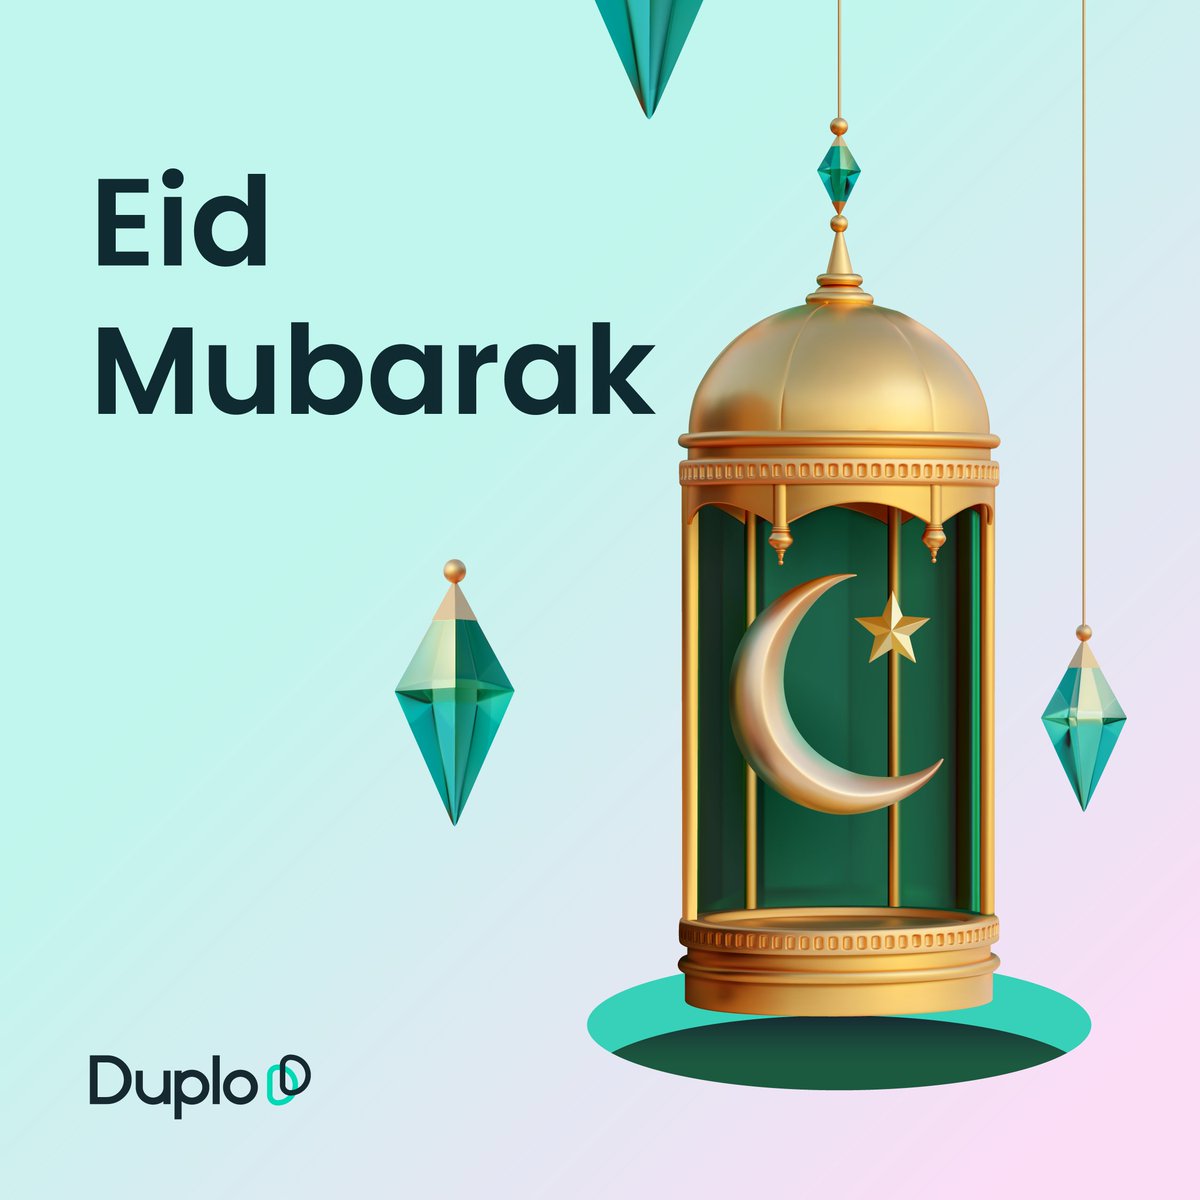 Eid Mubarak from Duplo! As you celebrate this Eid al-Fitr with loved ones, may peace, joy and blessings never leave your home.